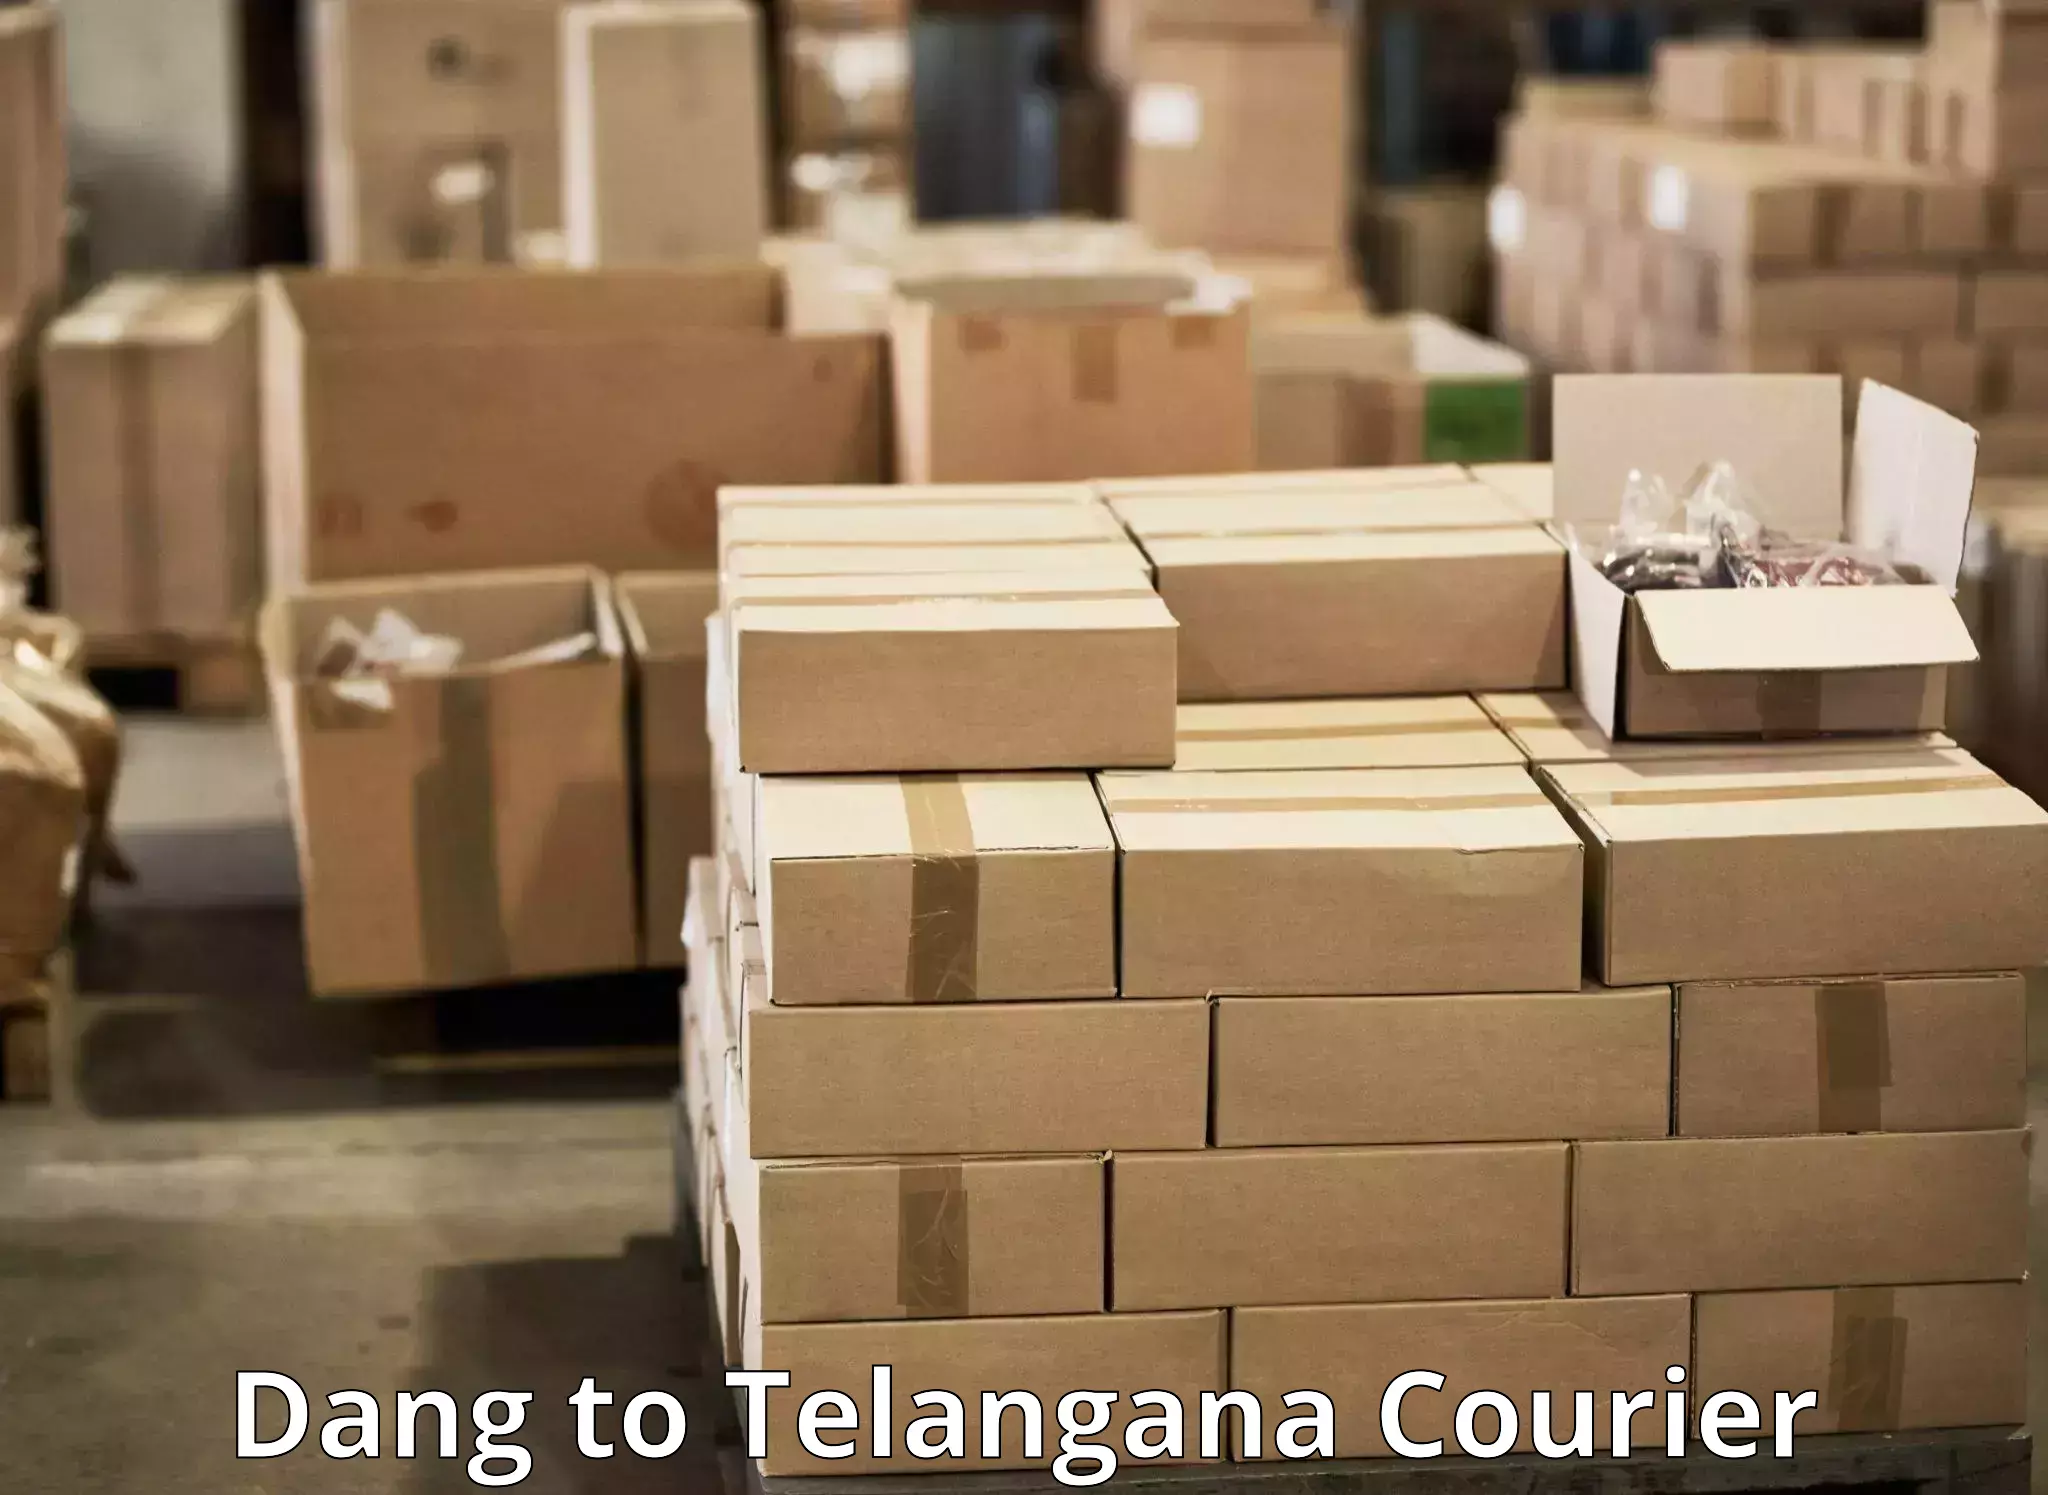 Global courier networks Dang to Alair